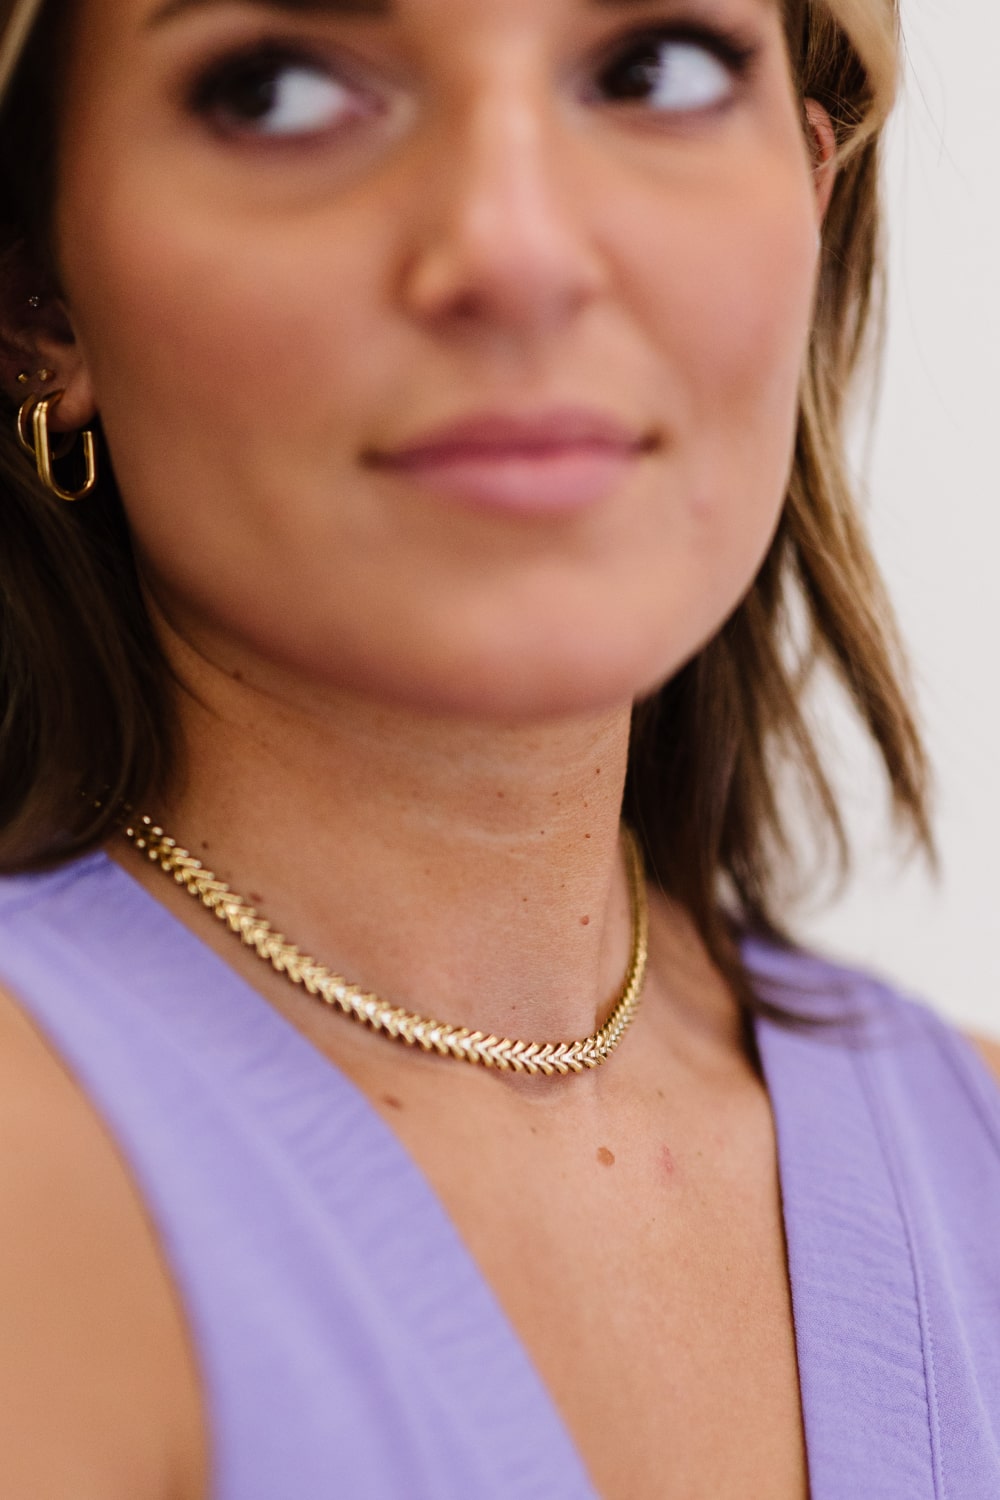 Very Captivating Gold-Plated V-Chain Necklace